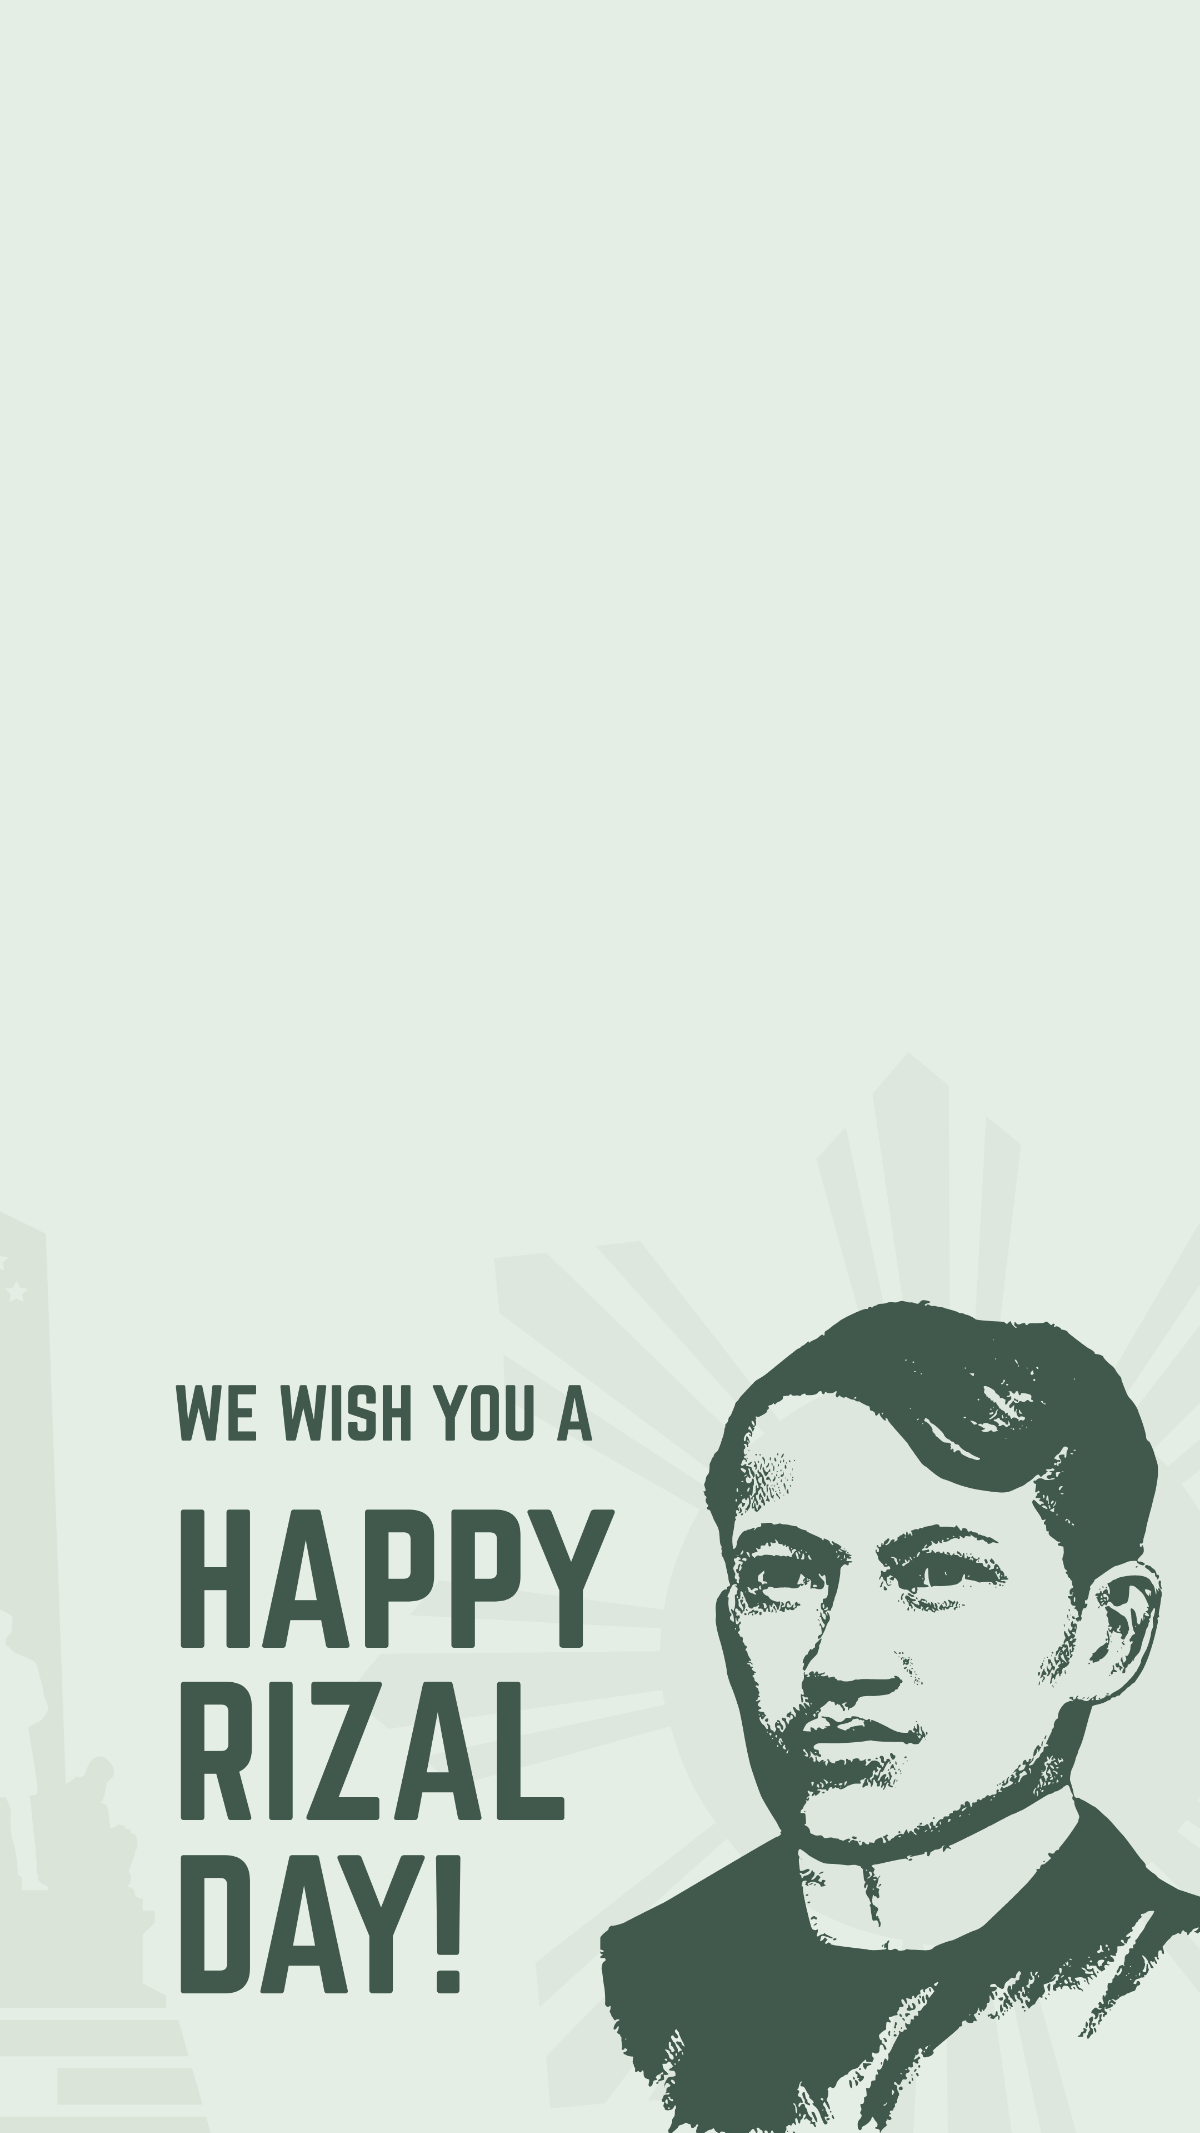 Free Vintage Rizal Day Snapchat Geofilter Template